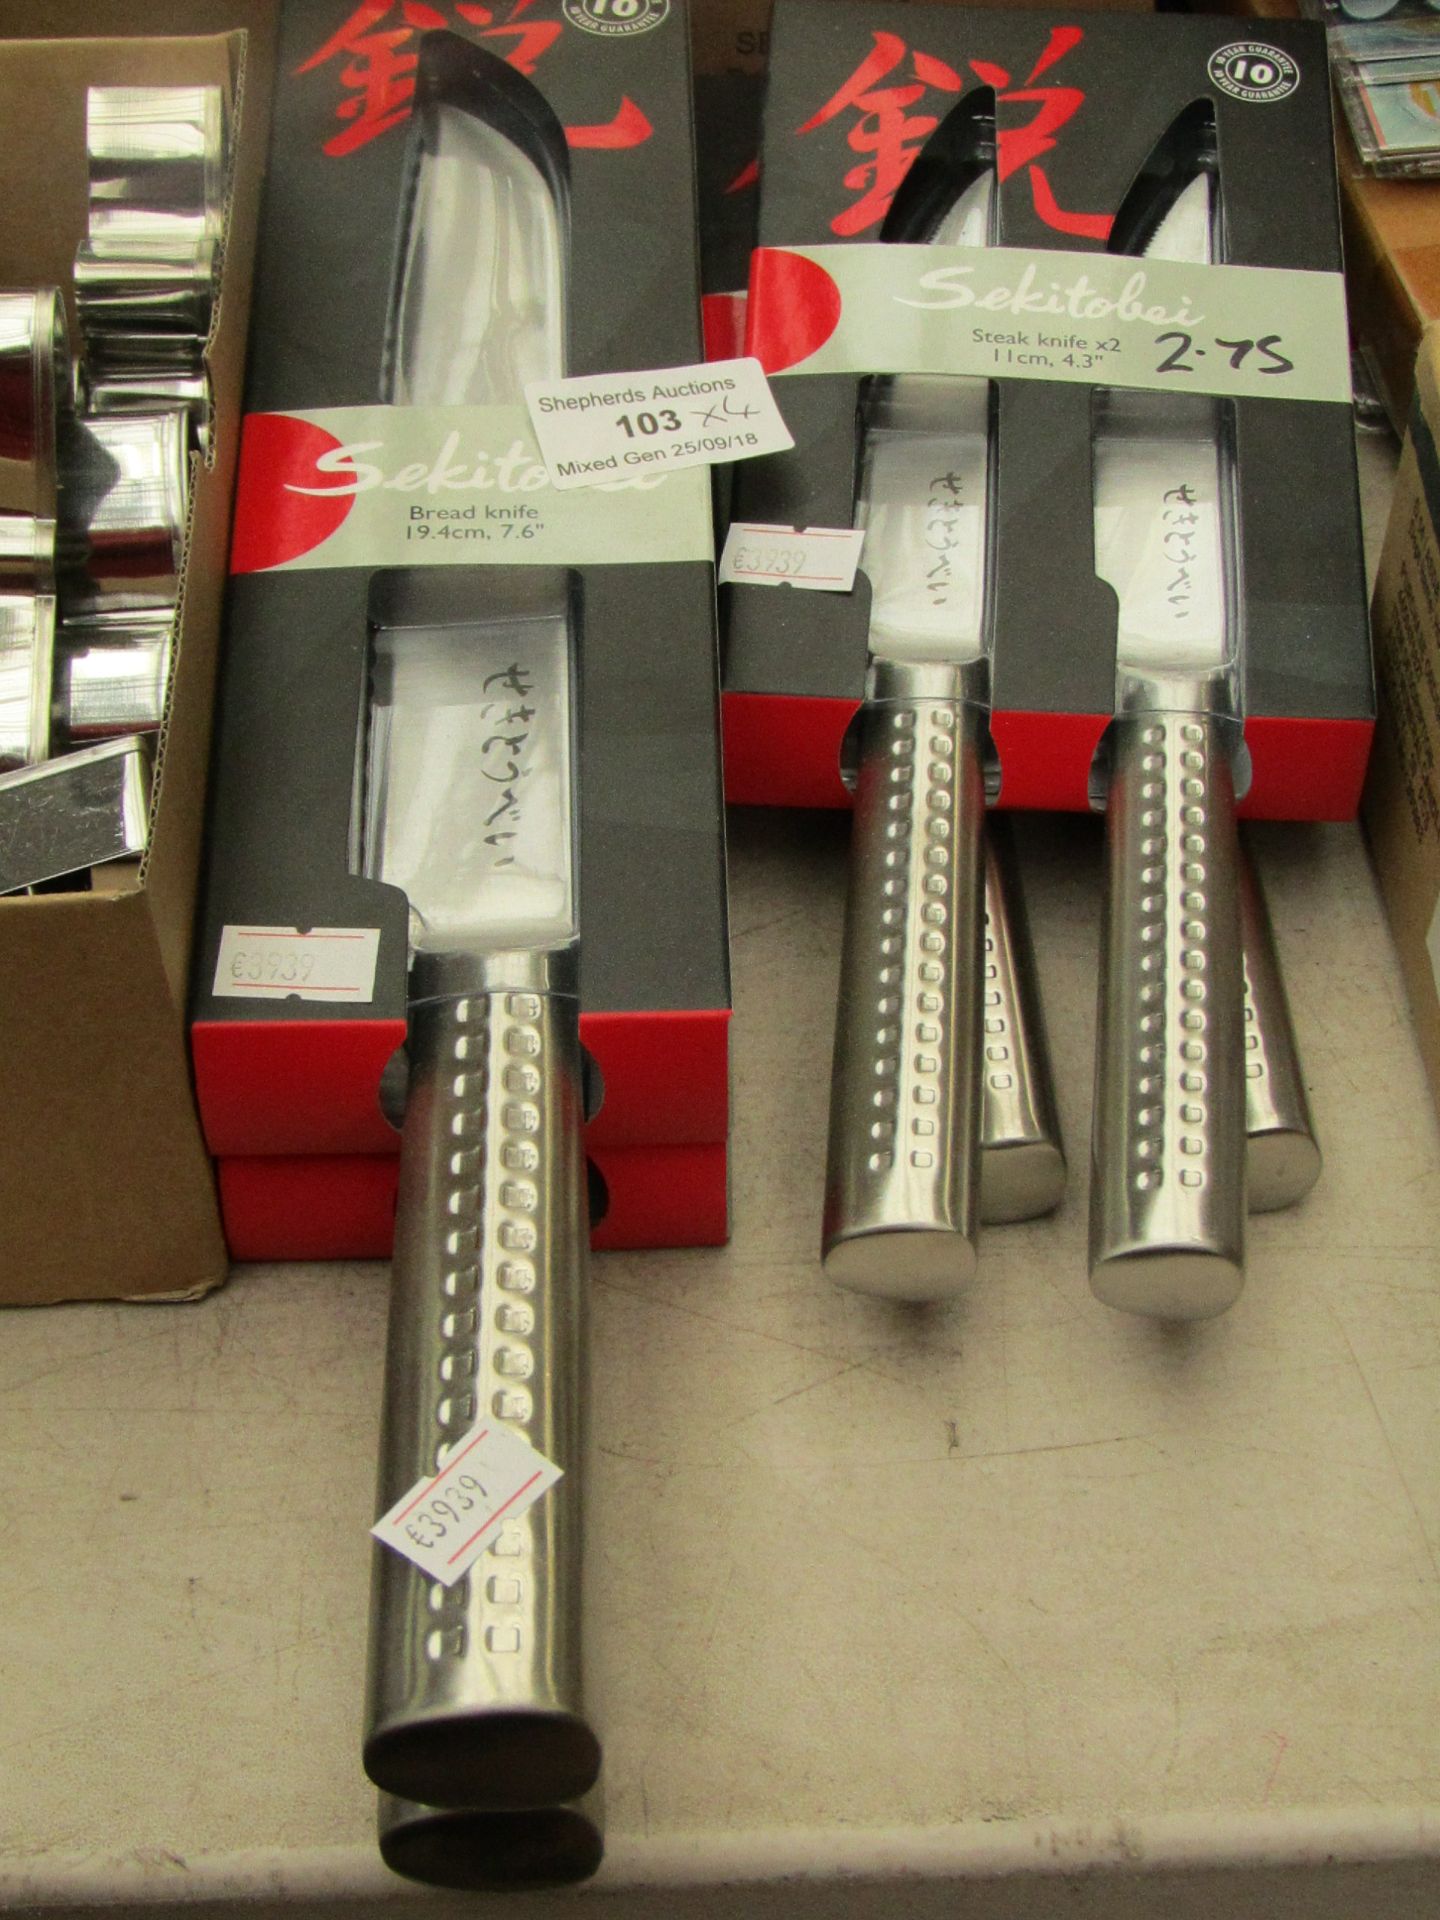 6x Sekitobei knives being: 2x bread knives 7.6" & 2x pairs of steak knives 4.3". All new & boxed.